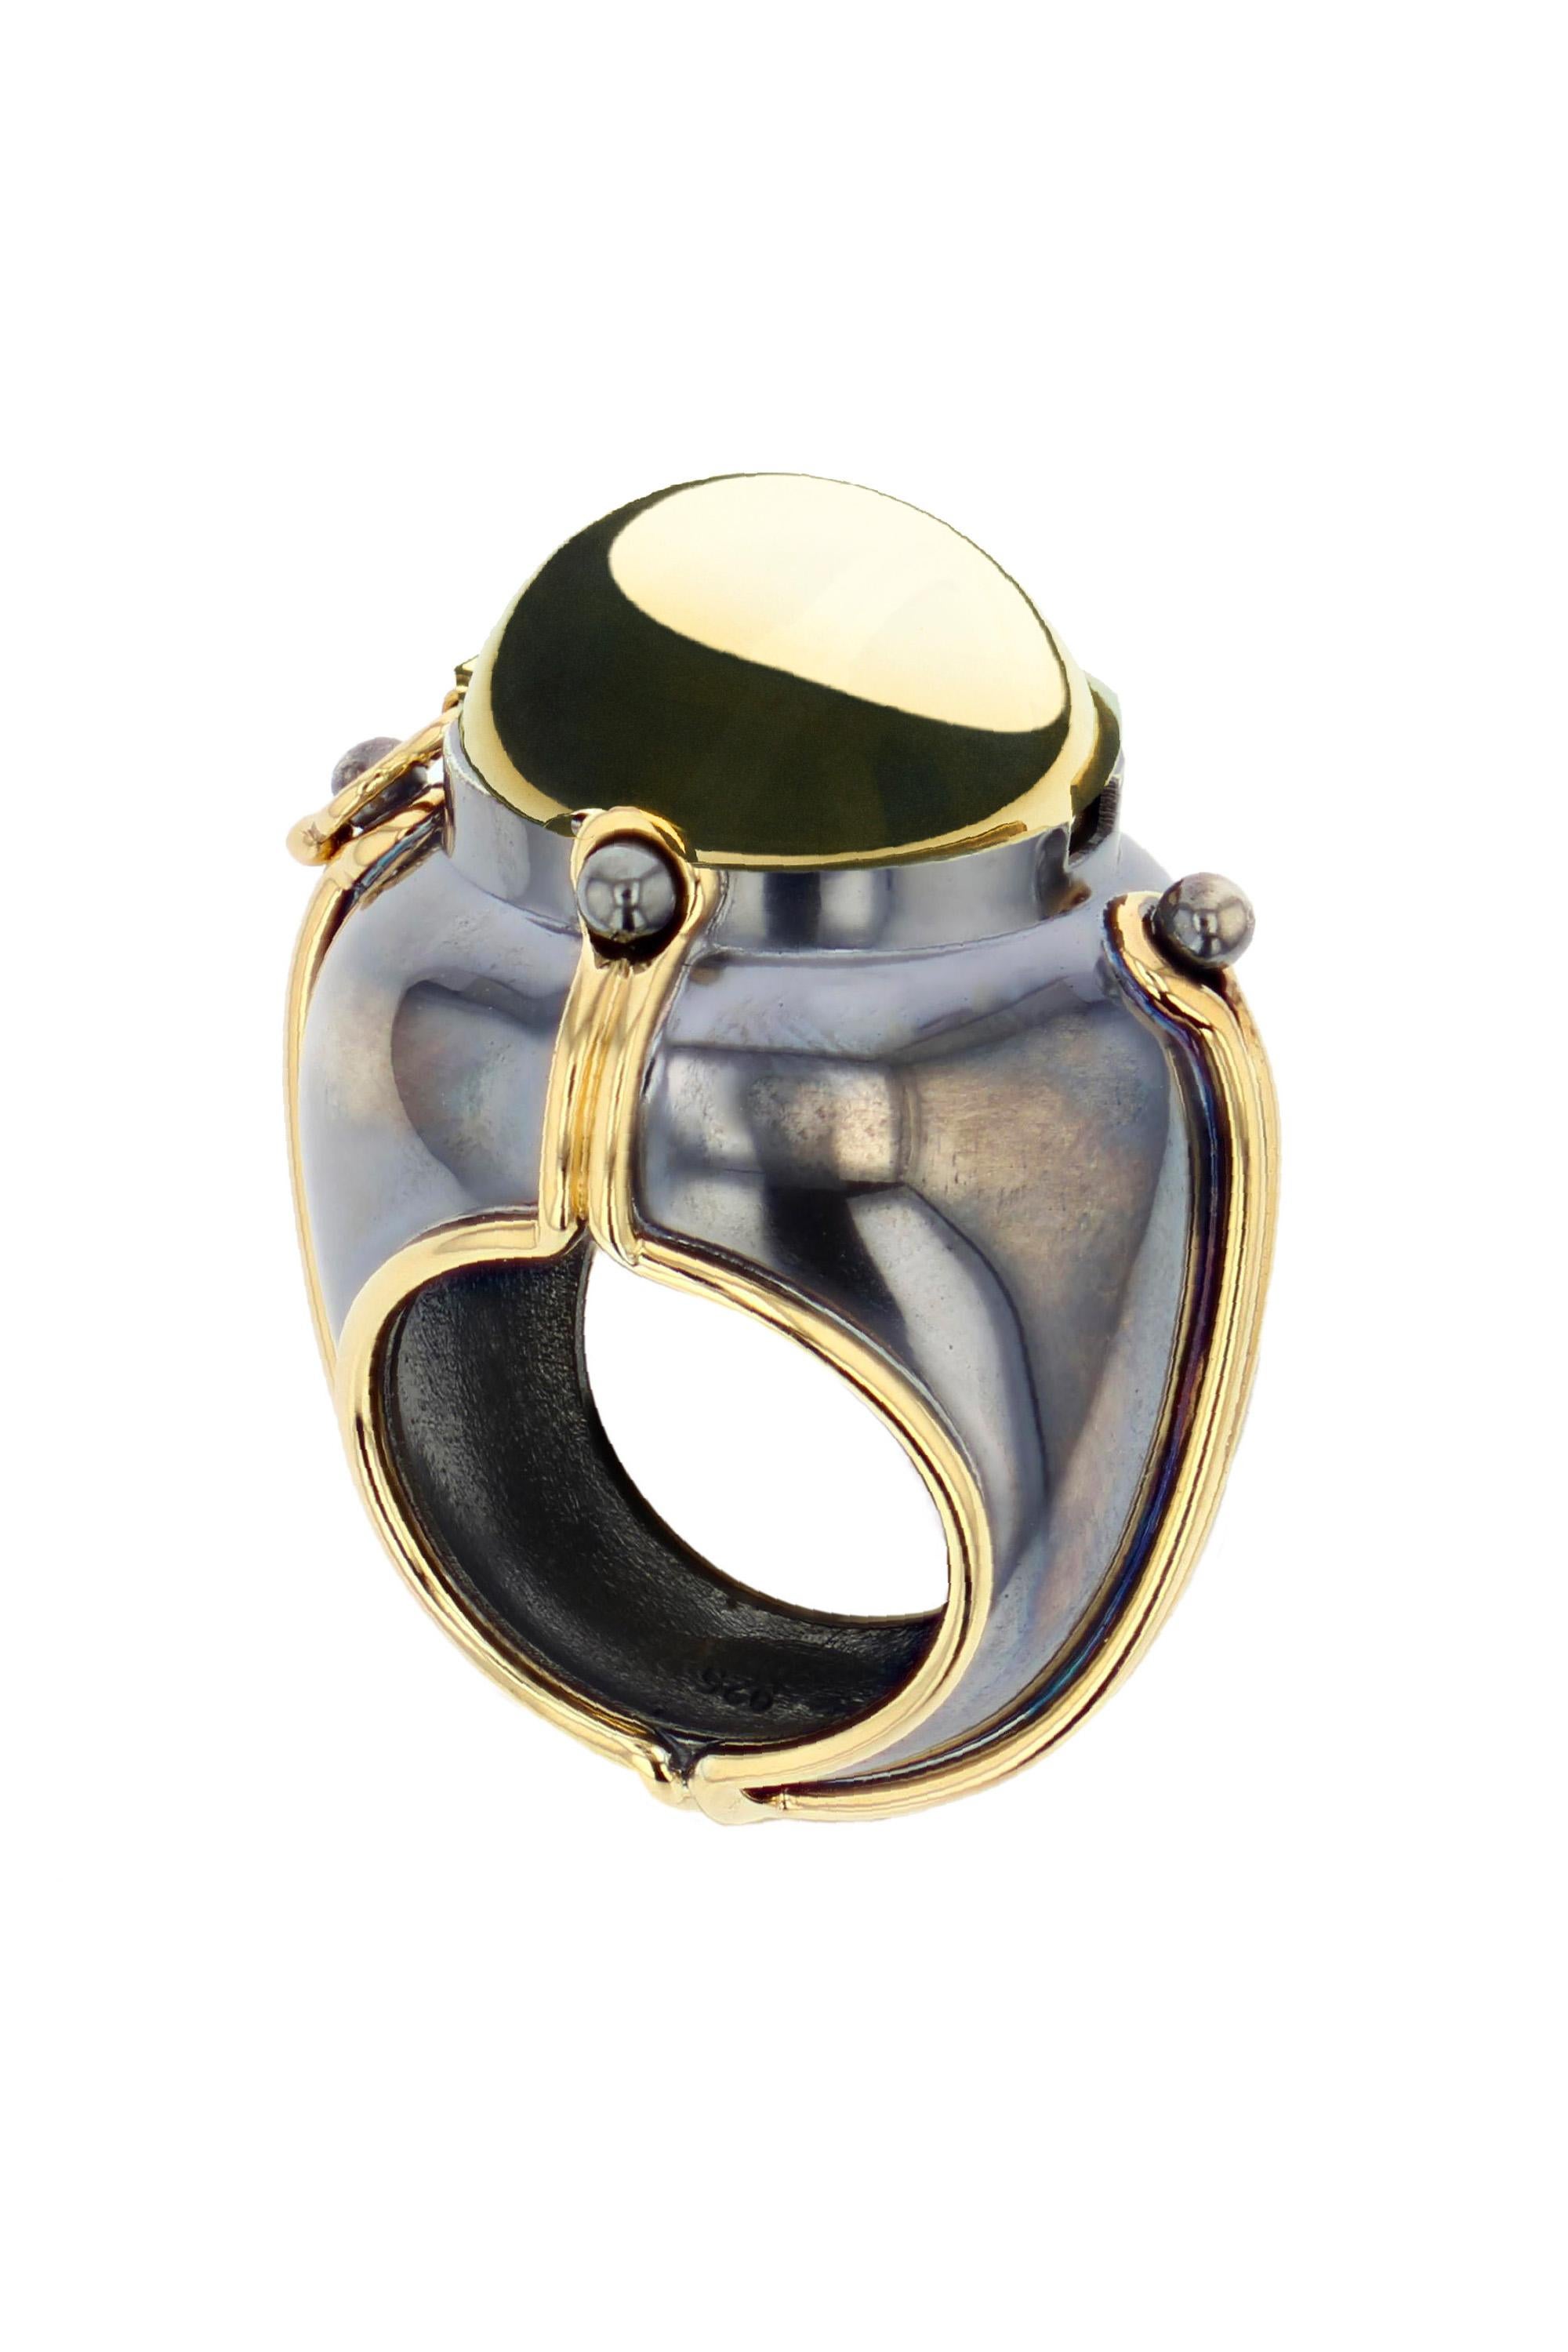 Gold and distressed silver ring. Rotating sphere revealing an Œil de Tigre, encircled by a white gold ring set with a diamond.

Details:
Œil de Tigre: ø 14 mm 
Diamond: 0.03 cts 
18k Gold: 12 g
Distressed Silver: 10 g
Made in France

